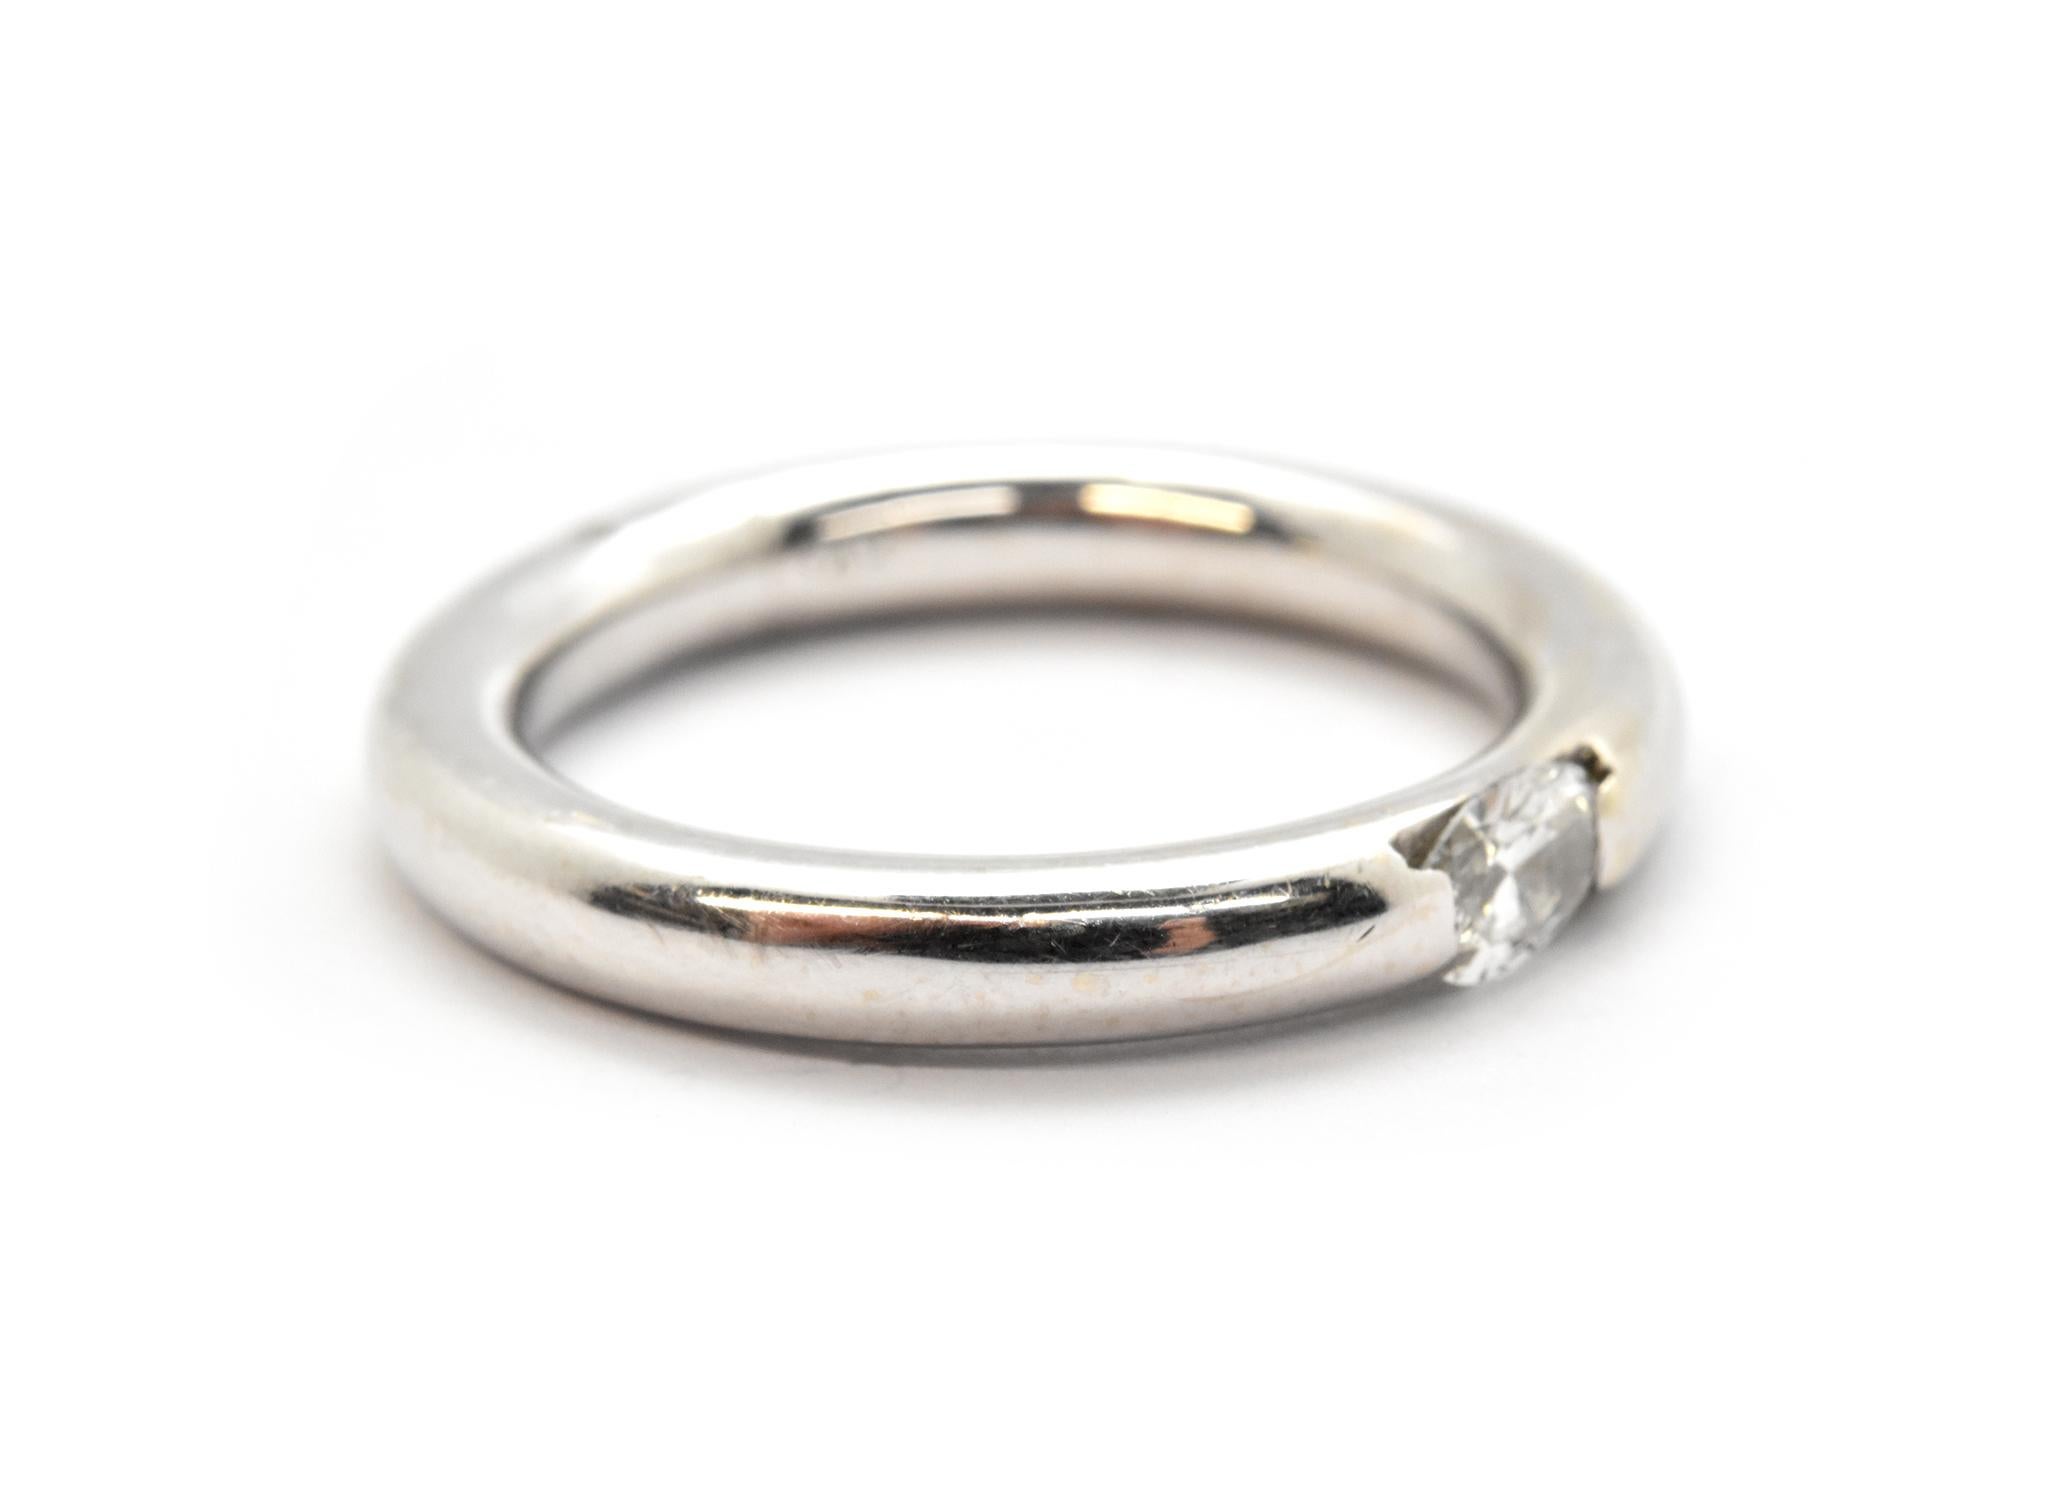 This contemporary ring is made in solid 14k white gold. It features a tension-set oval-cut diamond weighing approximately 0.25ct. The diamond is graded I in color and SI in clarity. The band measures 3mm wide, and it weighs 6.28 grams. The ring is a